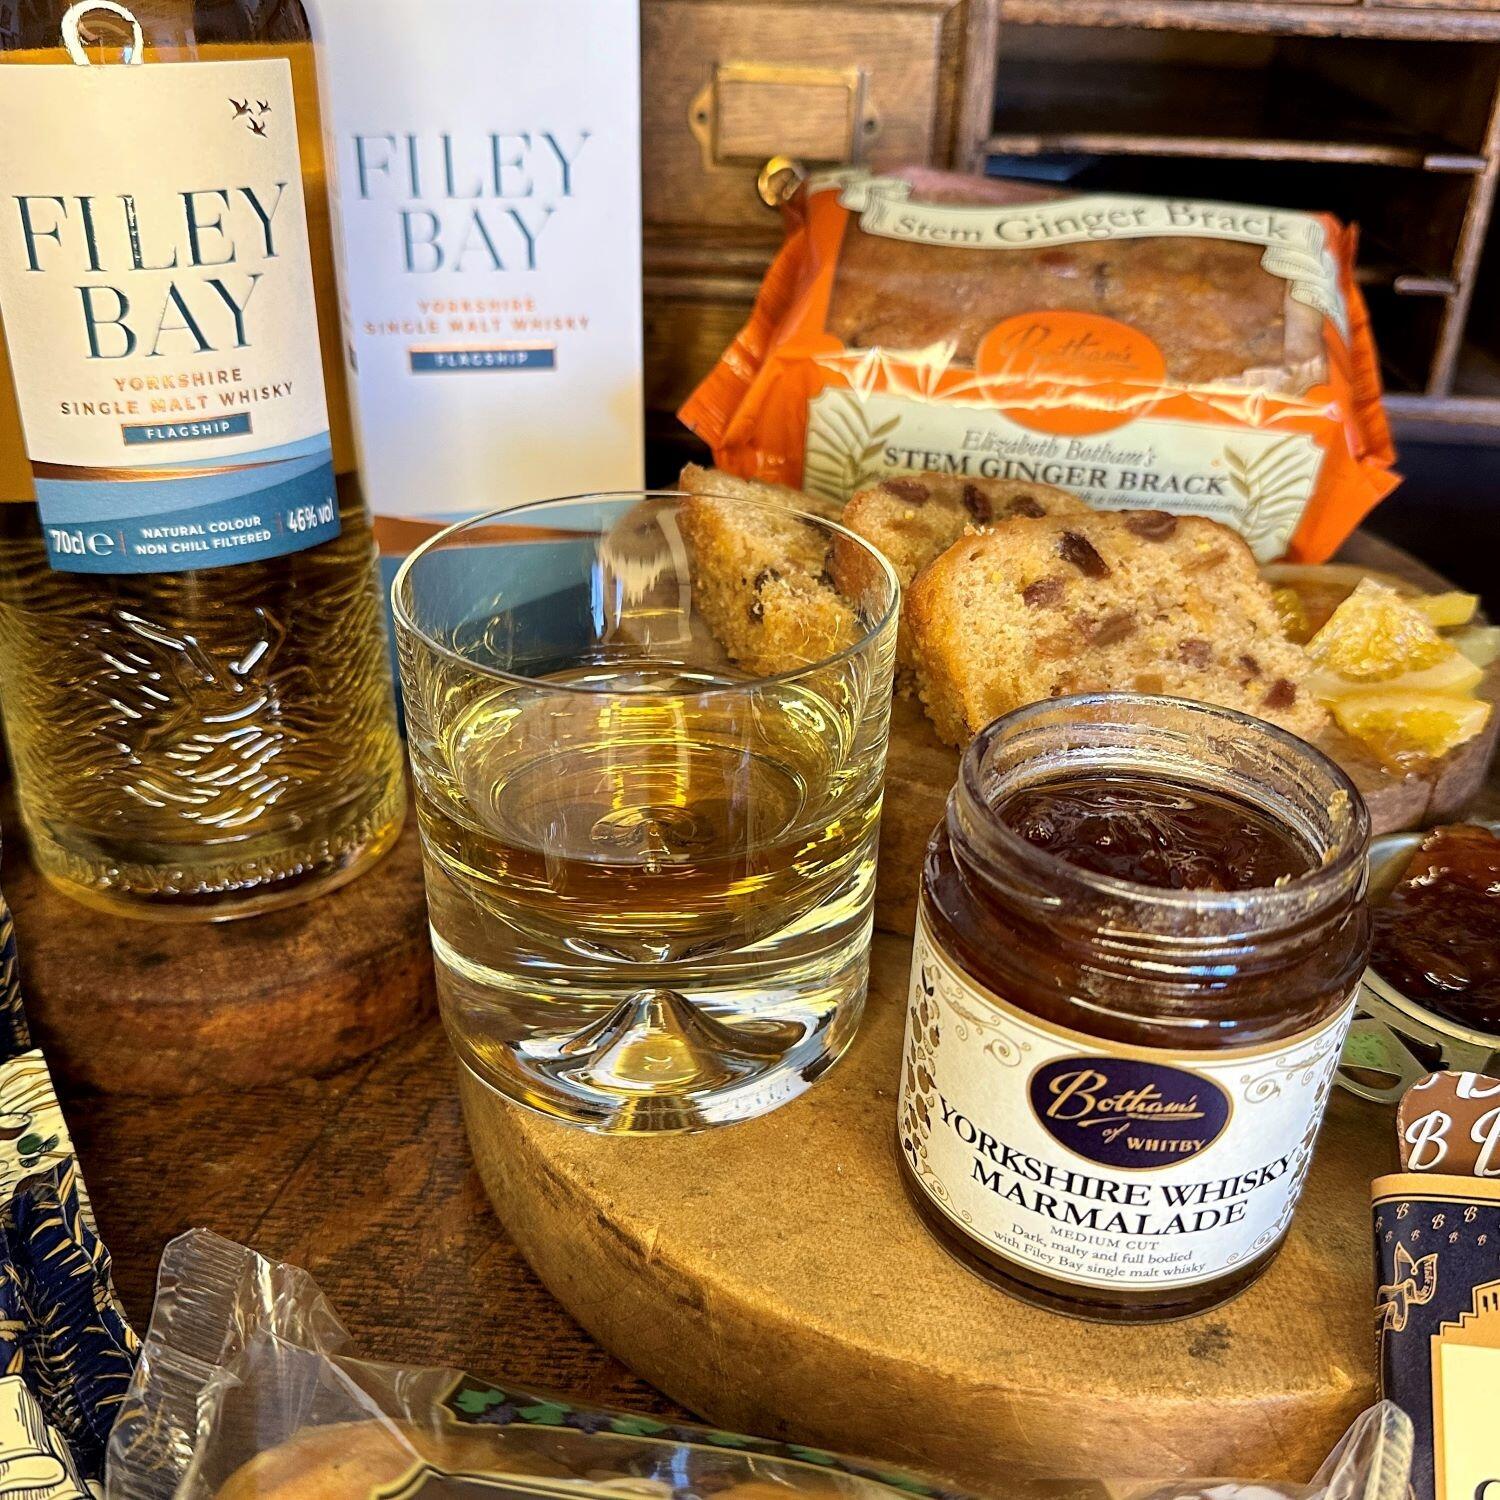 Image displays close-up of a glass of Filey Bay Whisky and the jar of Yorkshire Whisky Marmalade, set out on an old, wooden writing table.